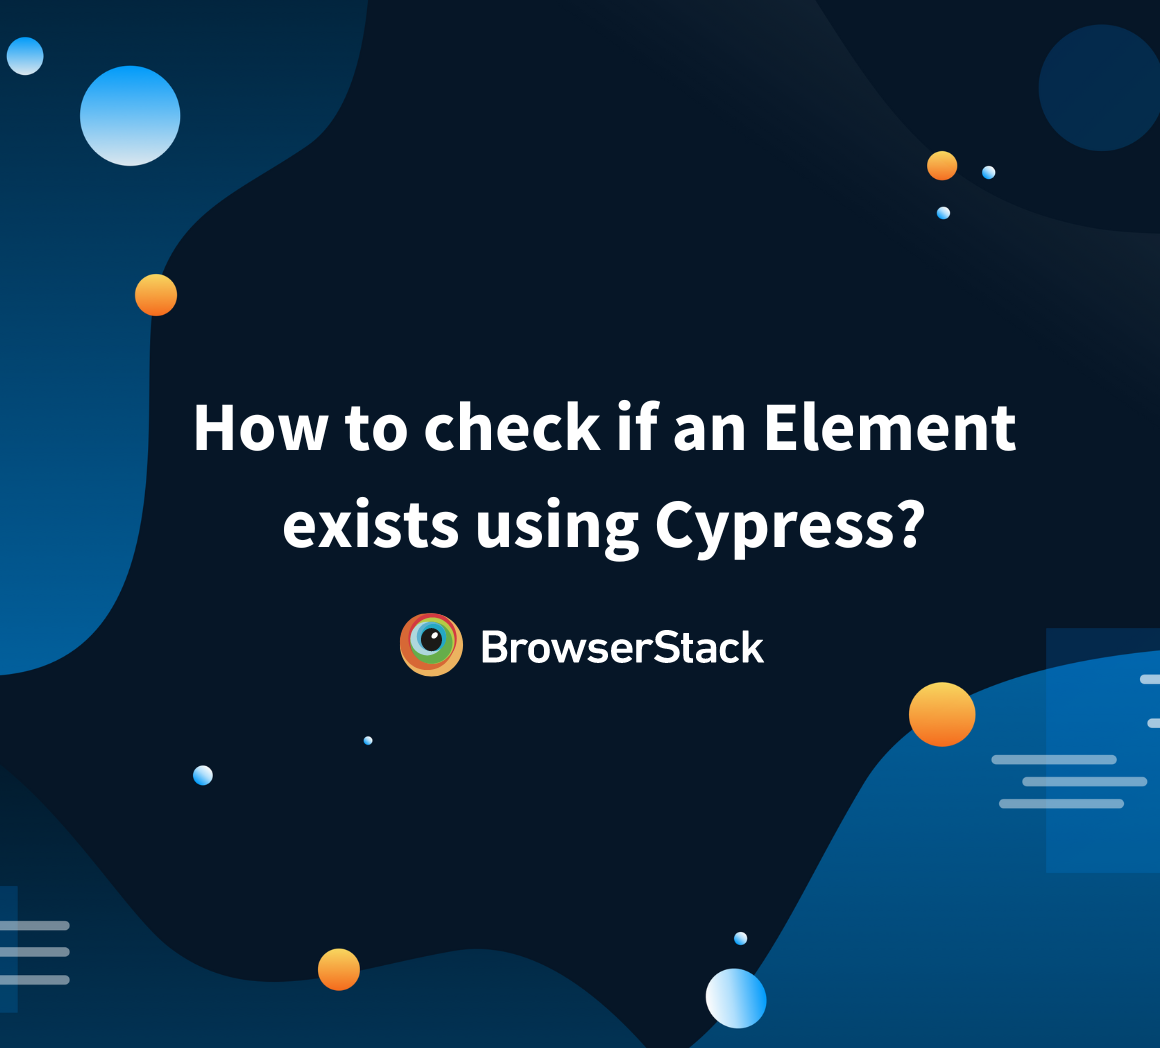 How to check if an Element exists using Cypress